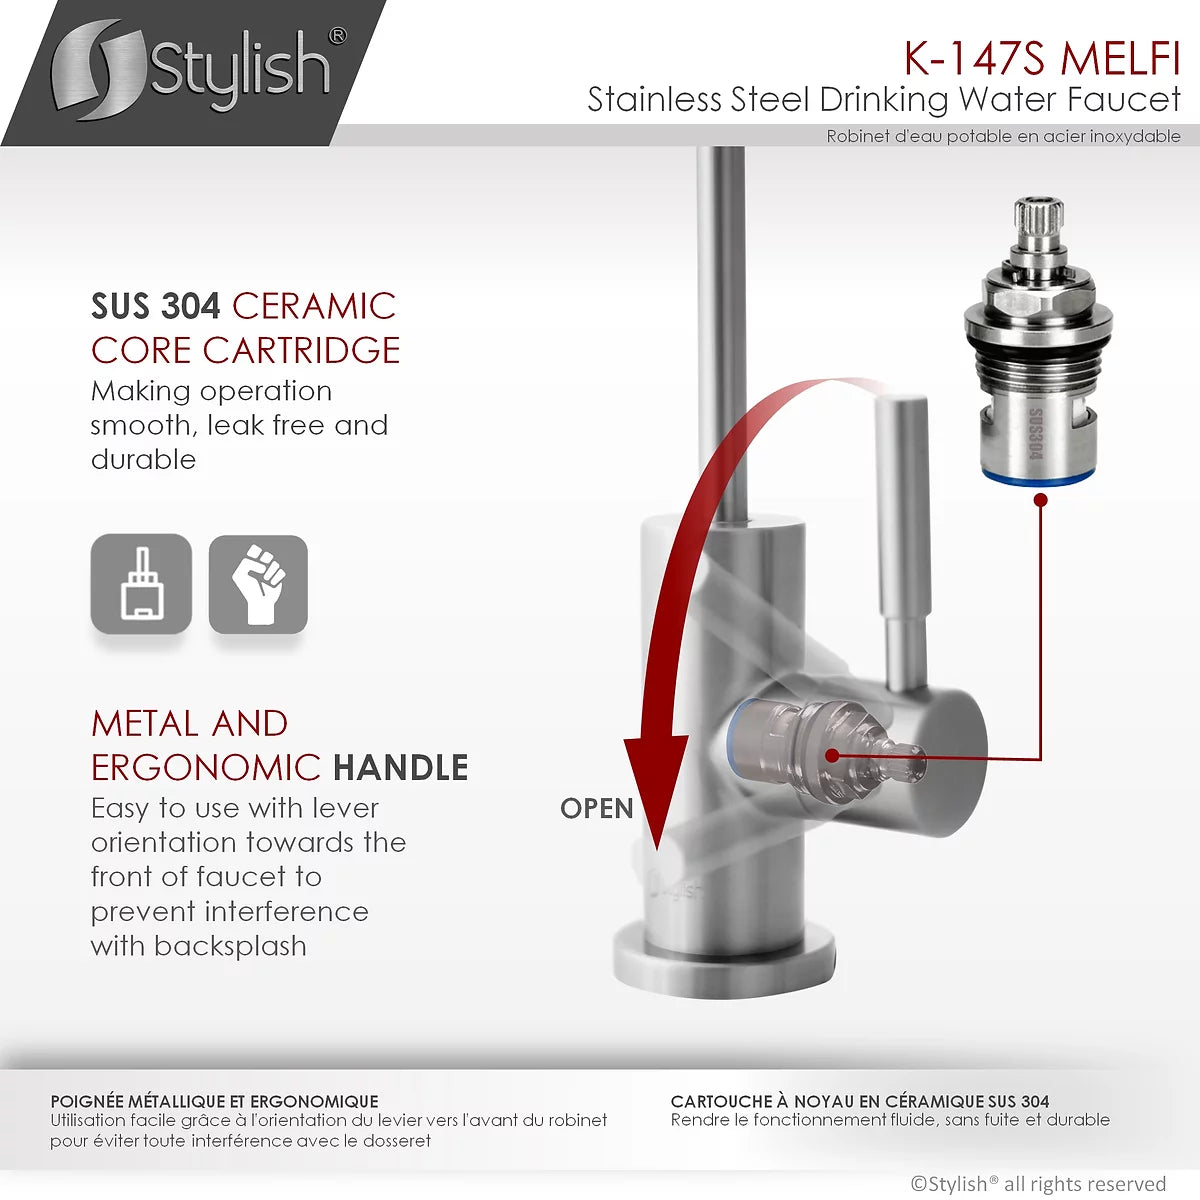 Stylish Melfi Single Handle Cold Water Tap - Stainless Steel Finish K-147S